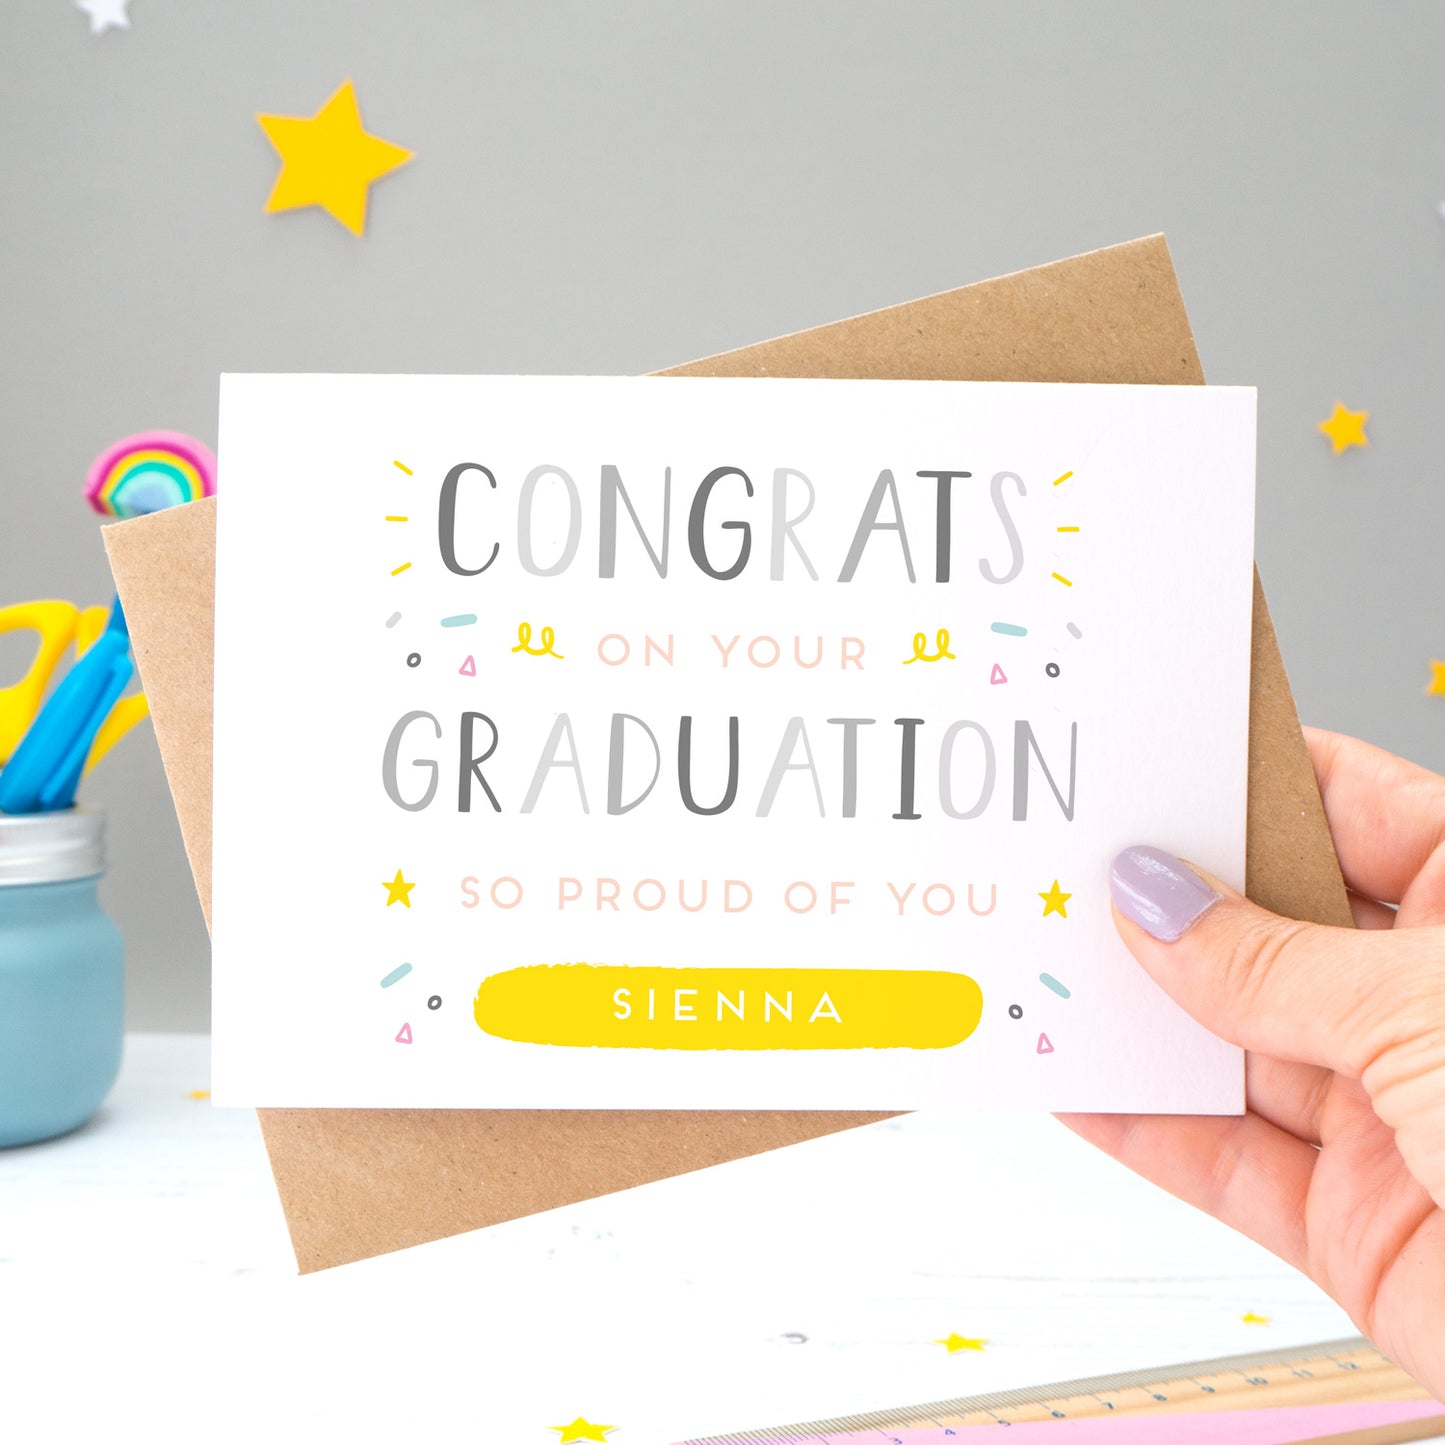 This personalised graduation card reads 'congrats on your graduation so proud of you [insert name].' The card is being held by Joanne Hawker in her somerset studio against a grey background with a kraft brown envelope with yellow and white stars. The card features grey text with varying tones of pink, blue and yellow.